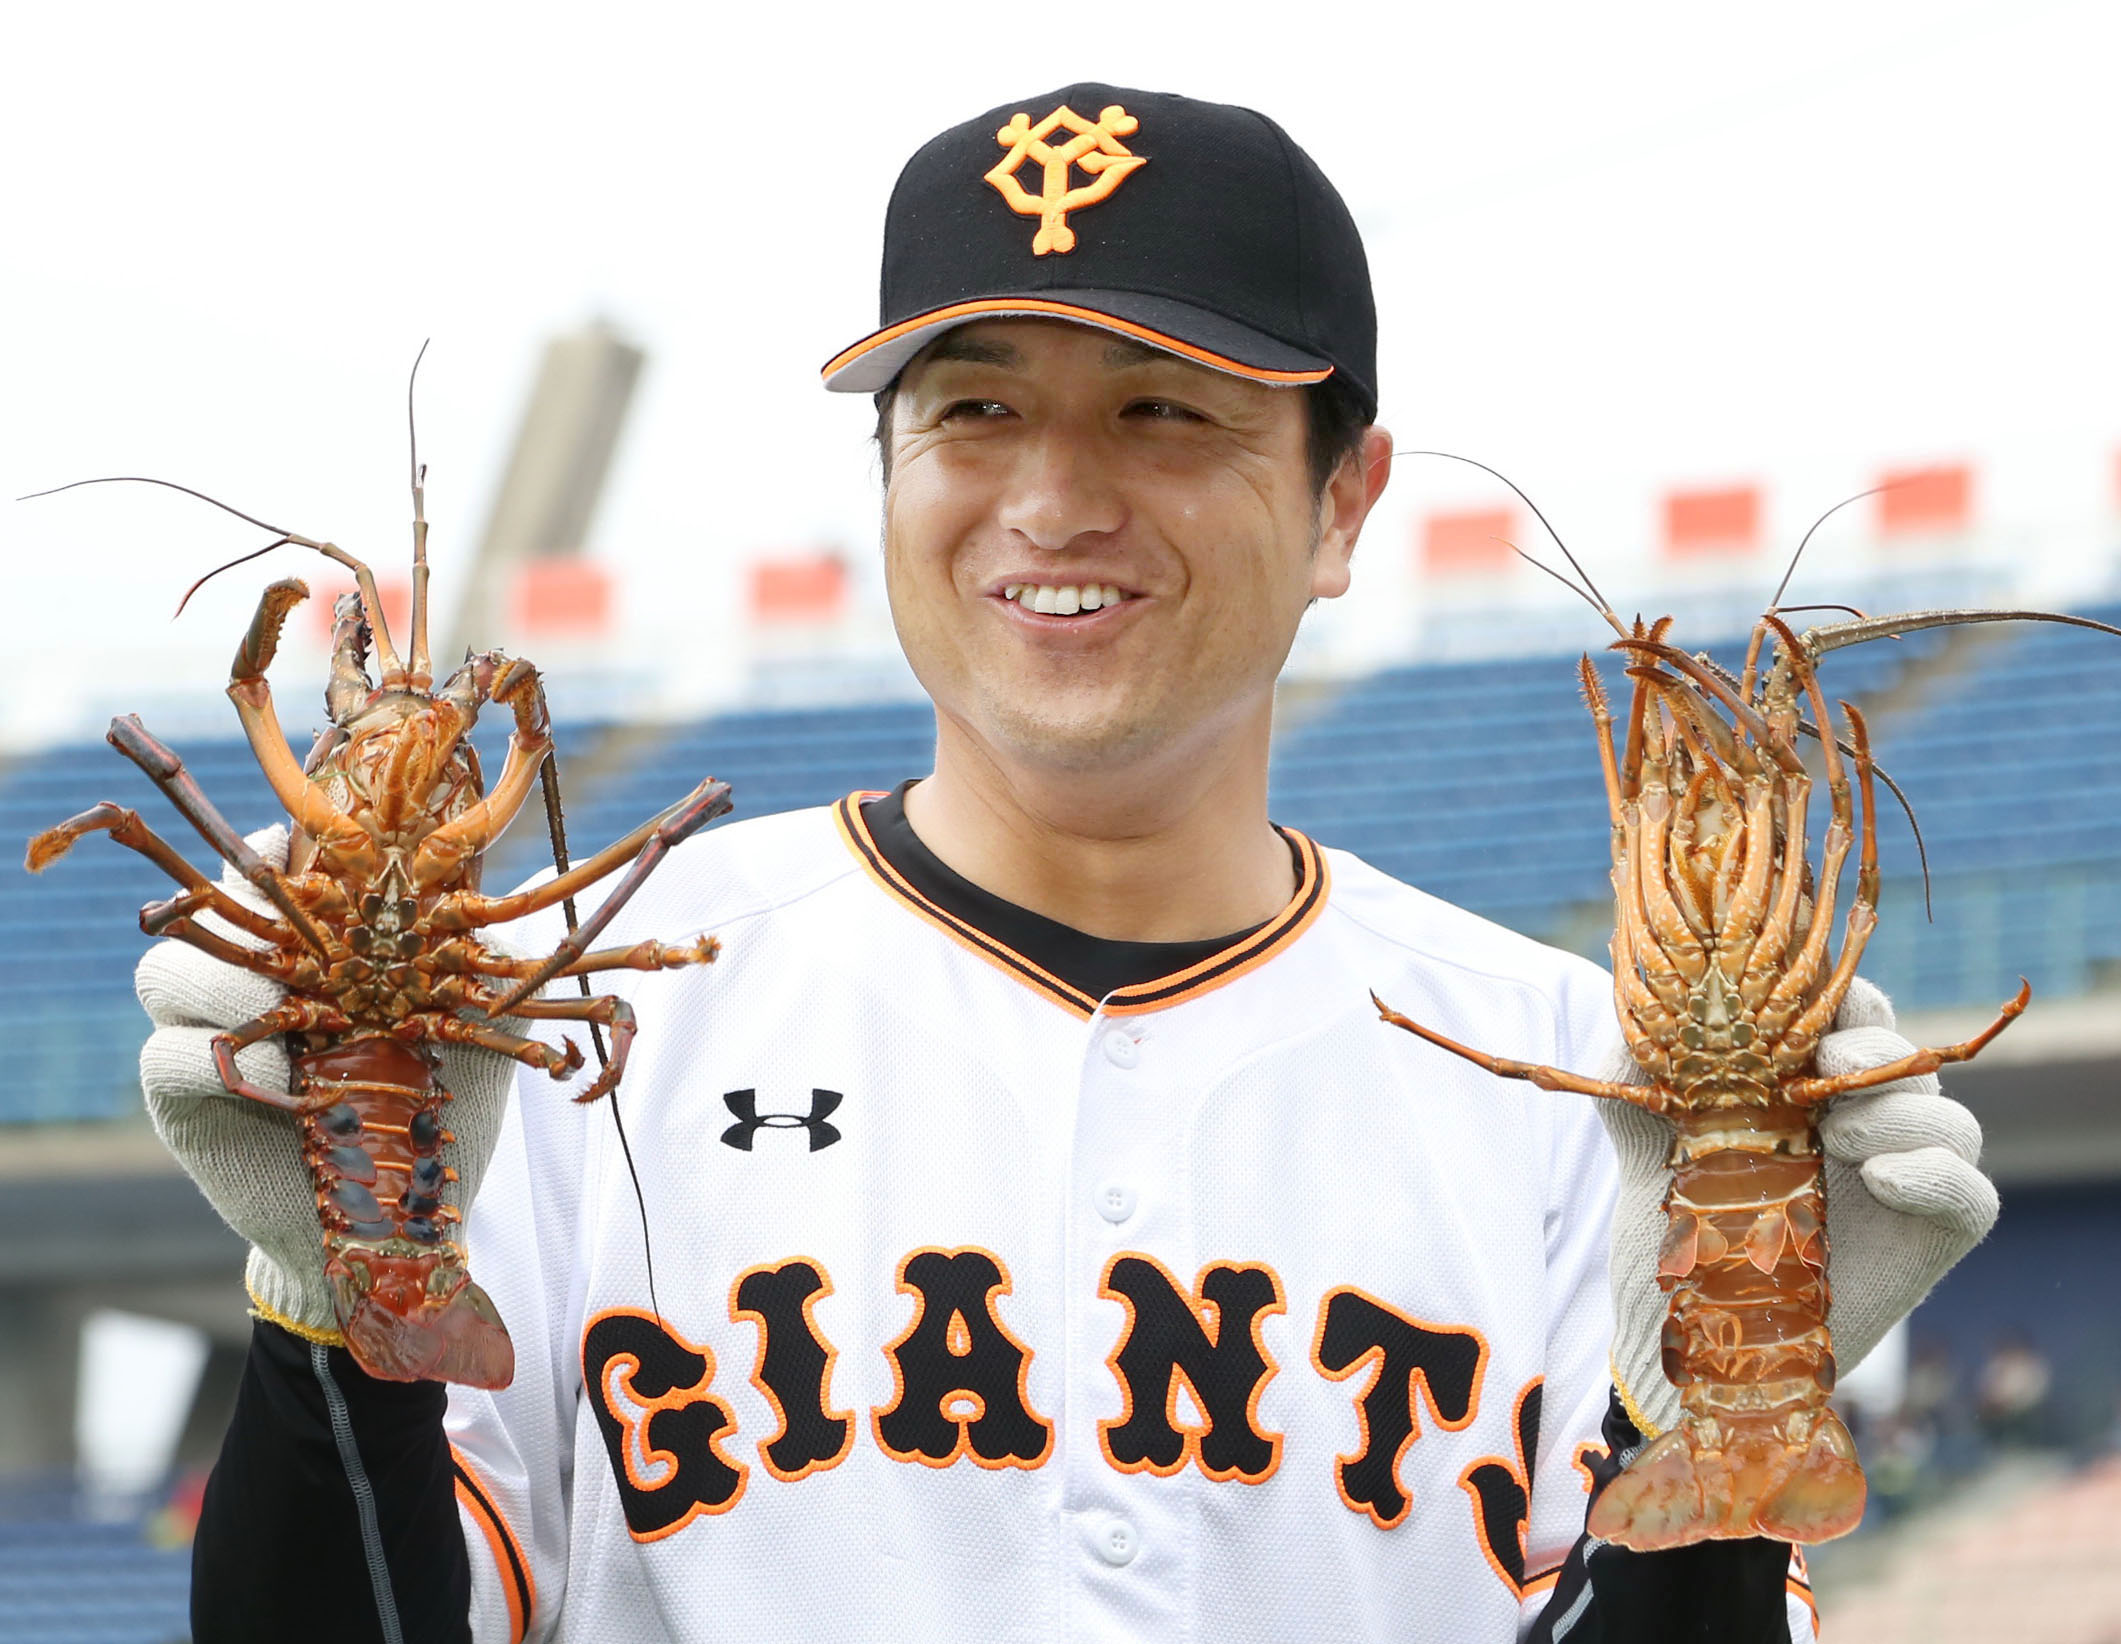 Time for fun and games about to end for new Giants skipper Takahashi